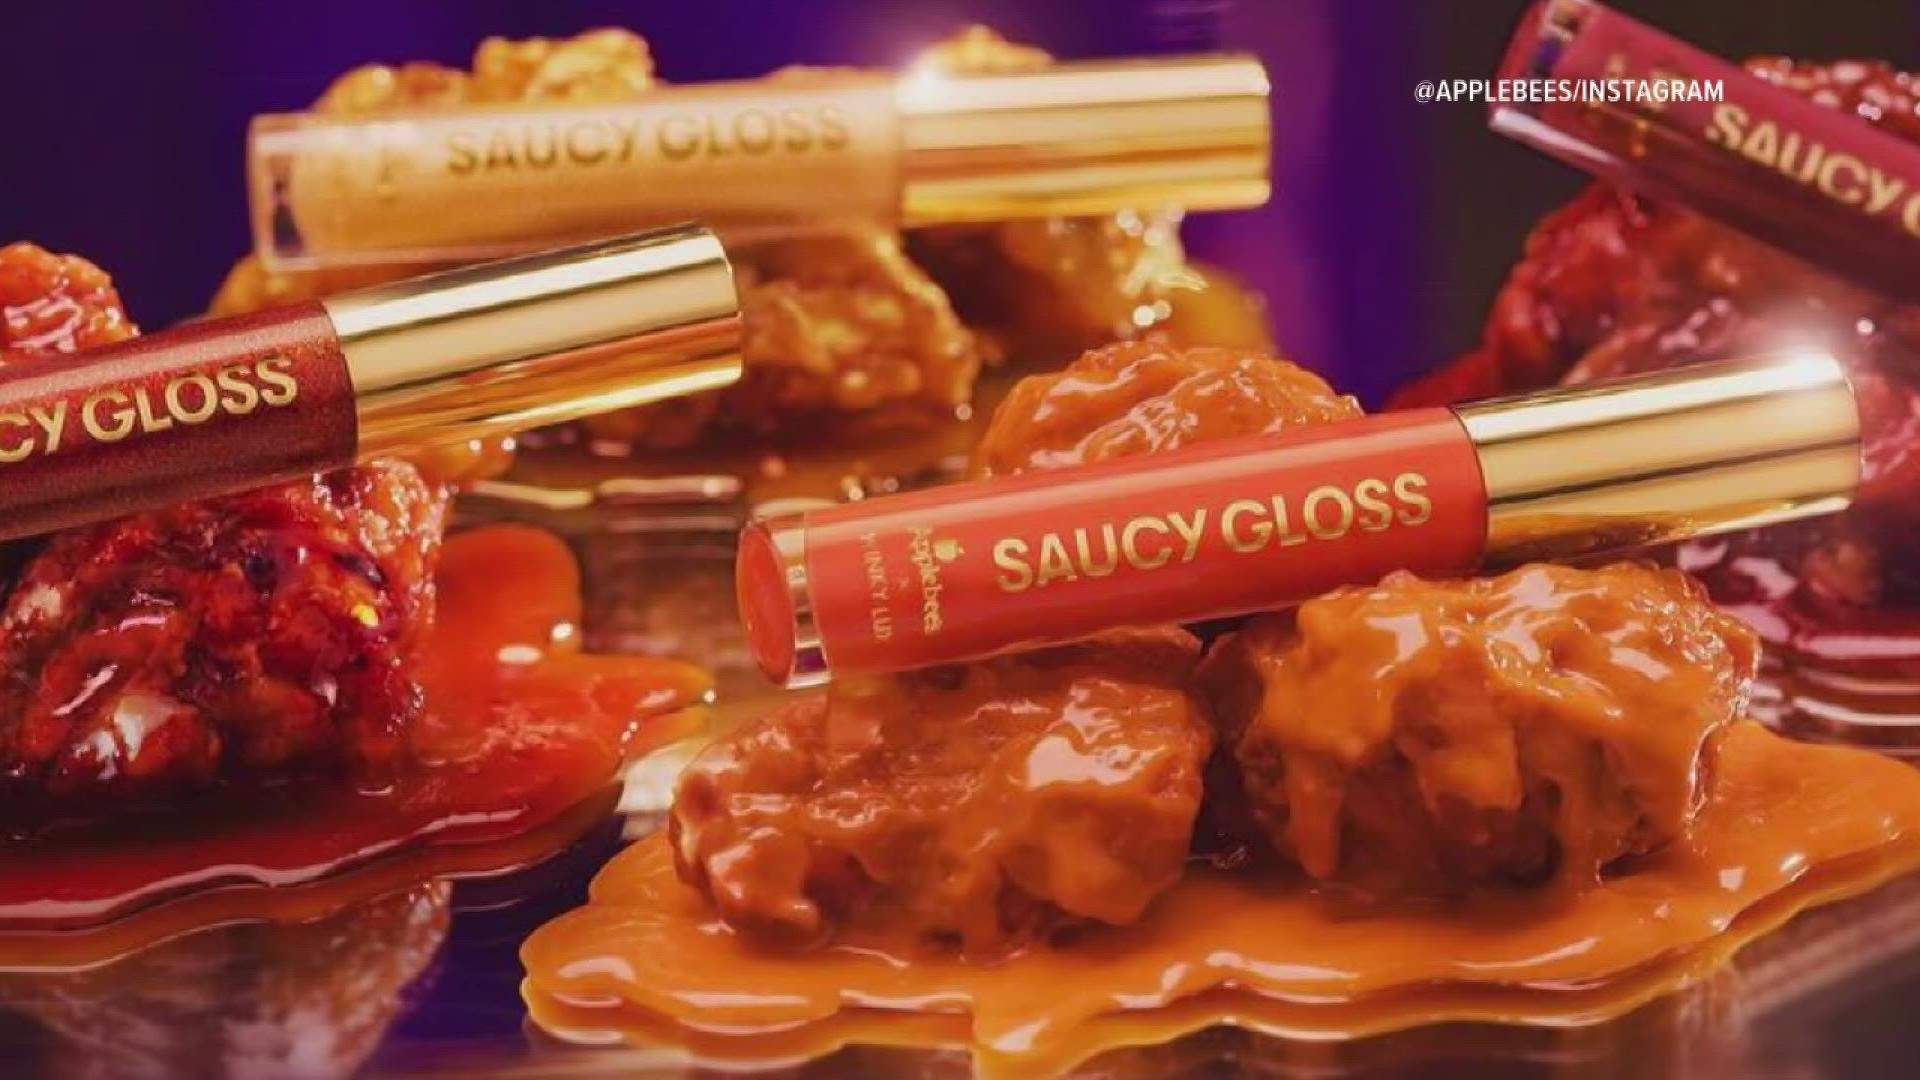 Applebess has teamed up with a cosmetics company to create a collection of four lip glosses inspired by wing sauces.